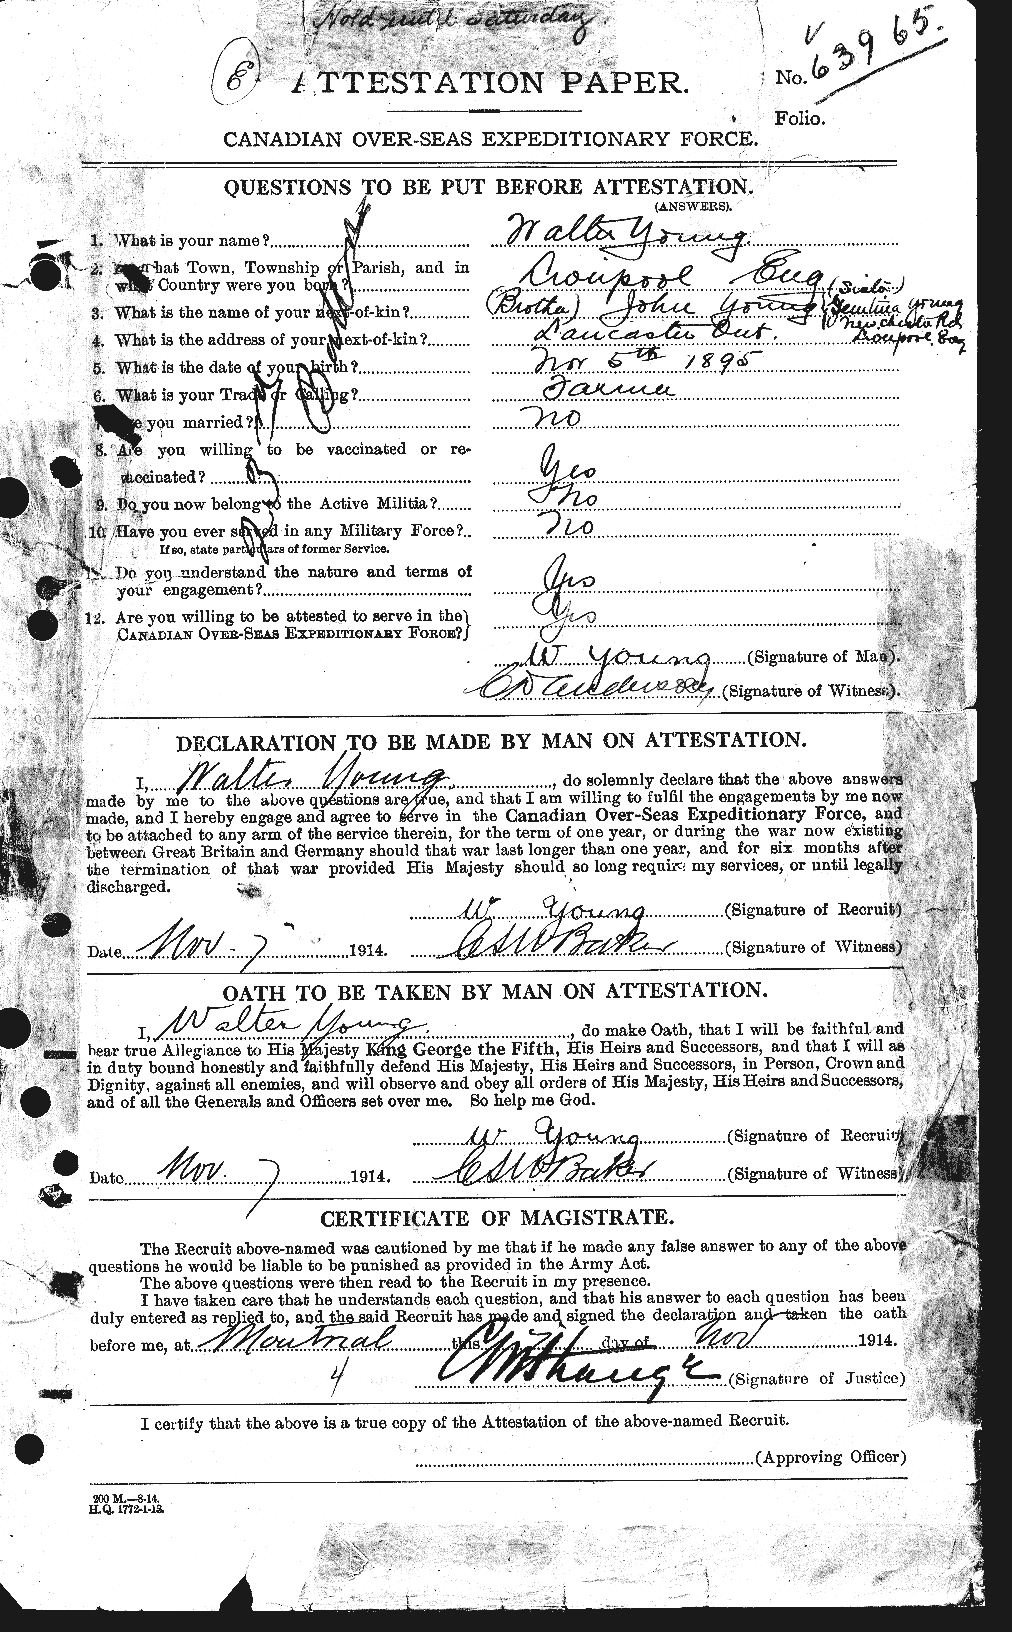 Personnel Records of the First World War - CEF 692433a